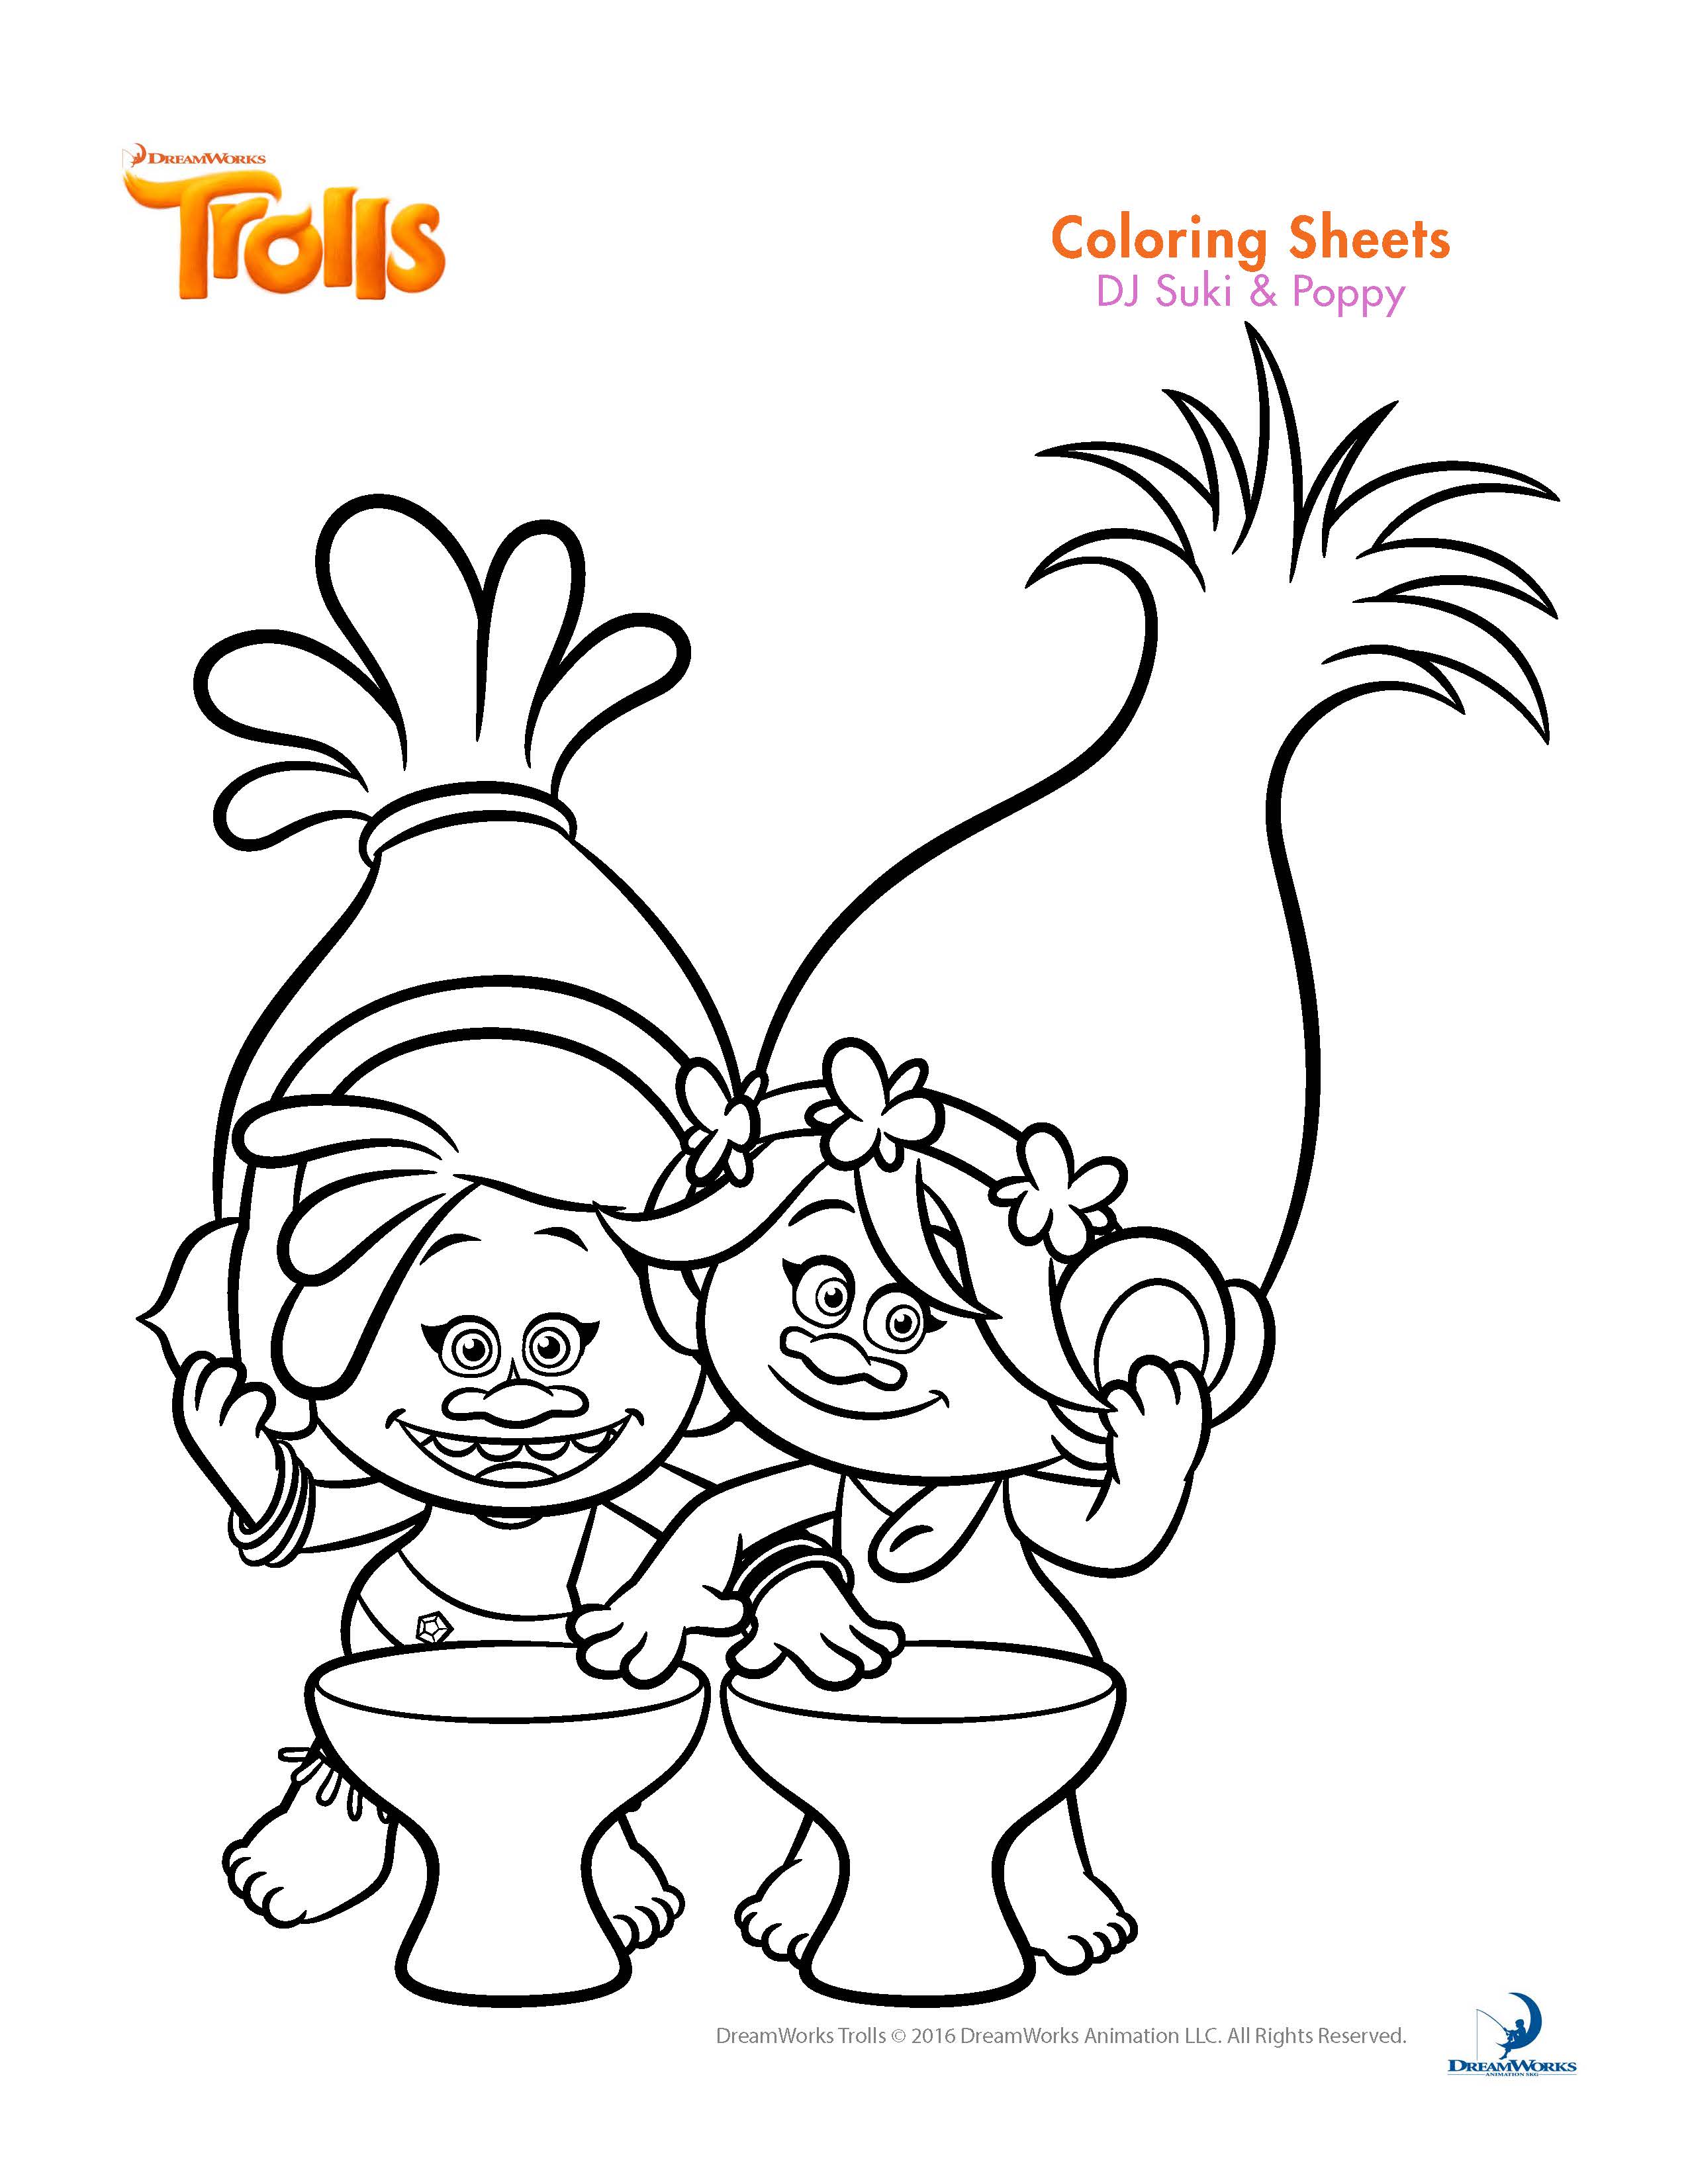 Trolls Movie Coloring Pages - Coloring Home